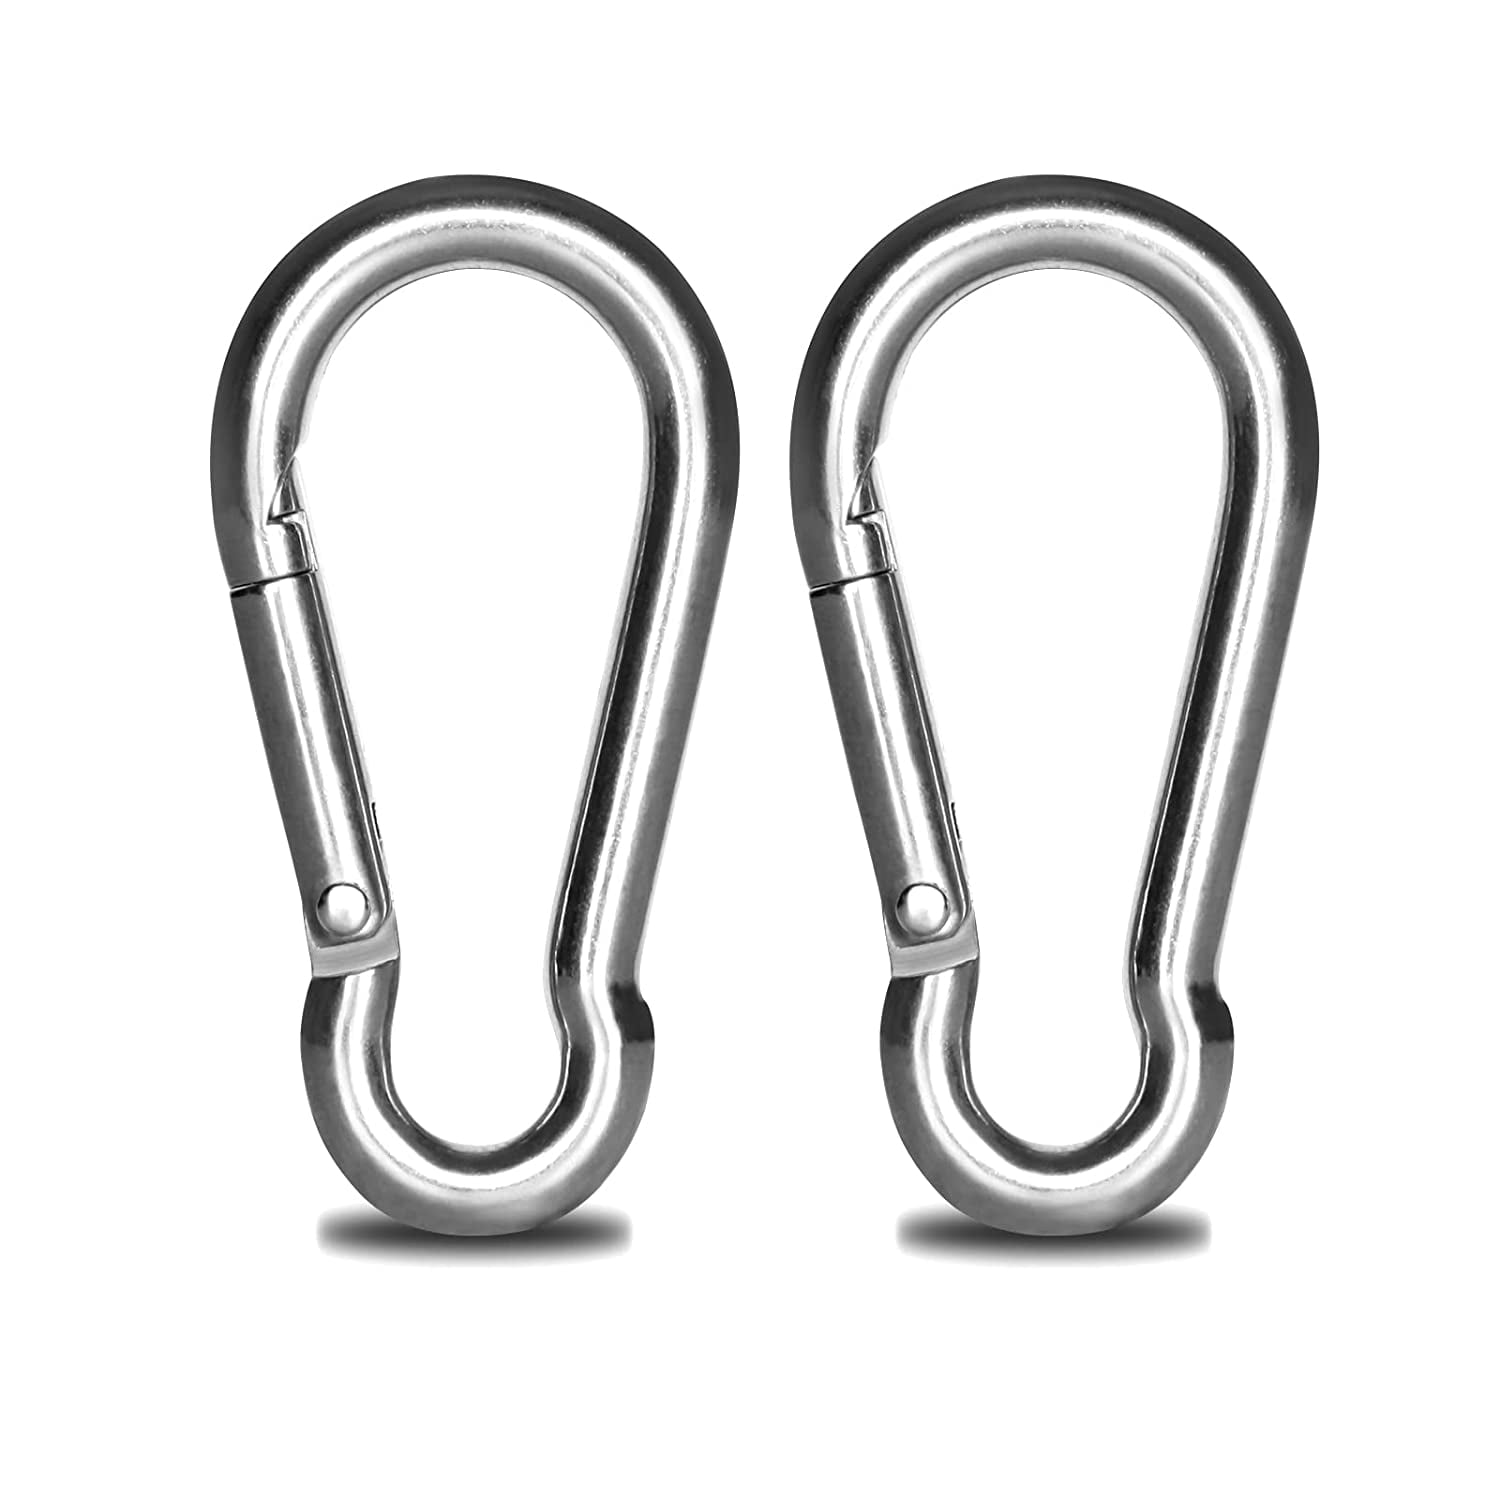 2 Pack 304 Stainless Steel Carabiner Clip, 5.5 inch Heavy Duty Spring Snap  Hook, Large Caribeener Clips for Camping, Swing Set, Hammock, Hiking,  Travel, Weight Lifting Machine, Home Gym Equipment 